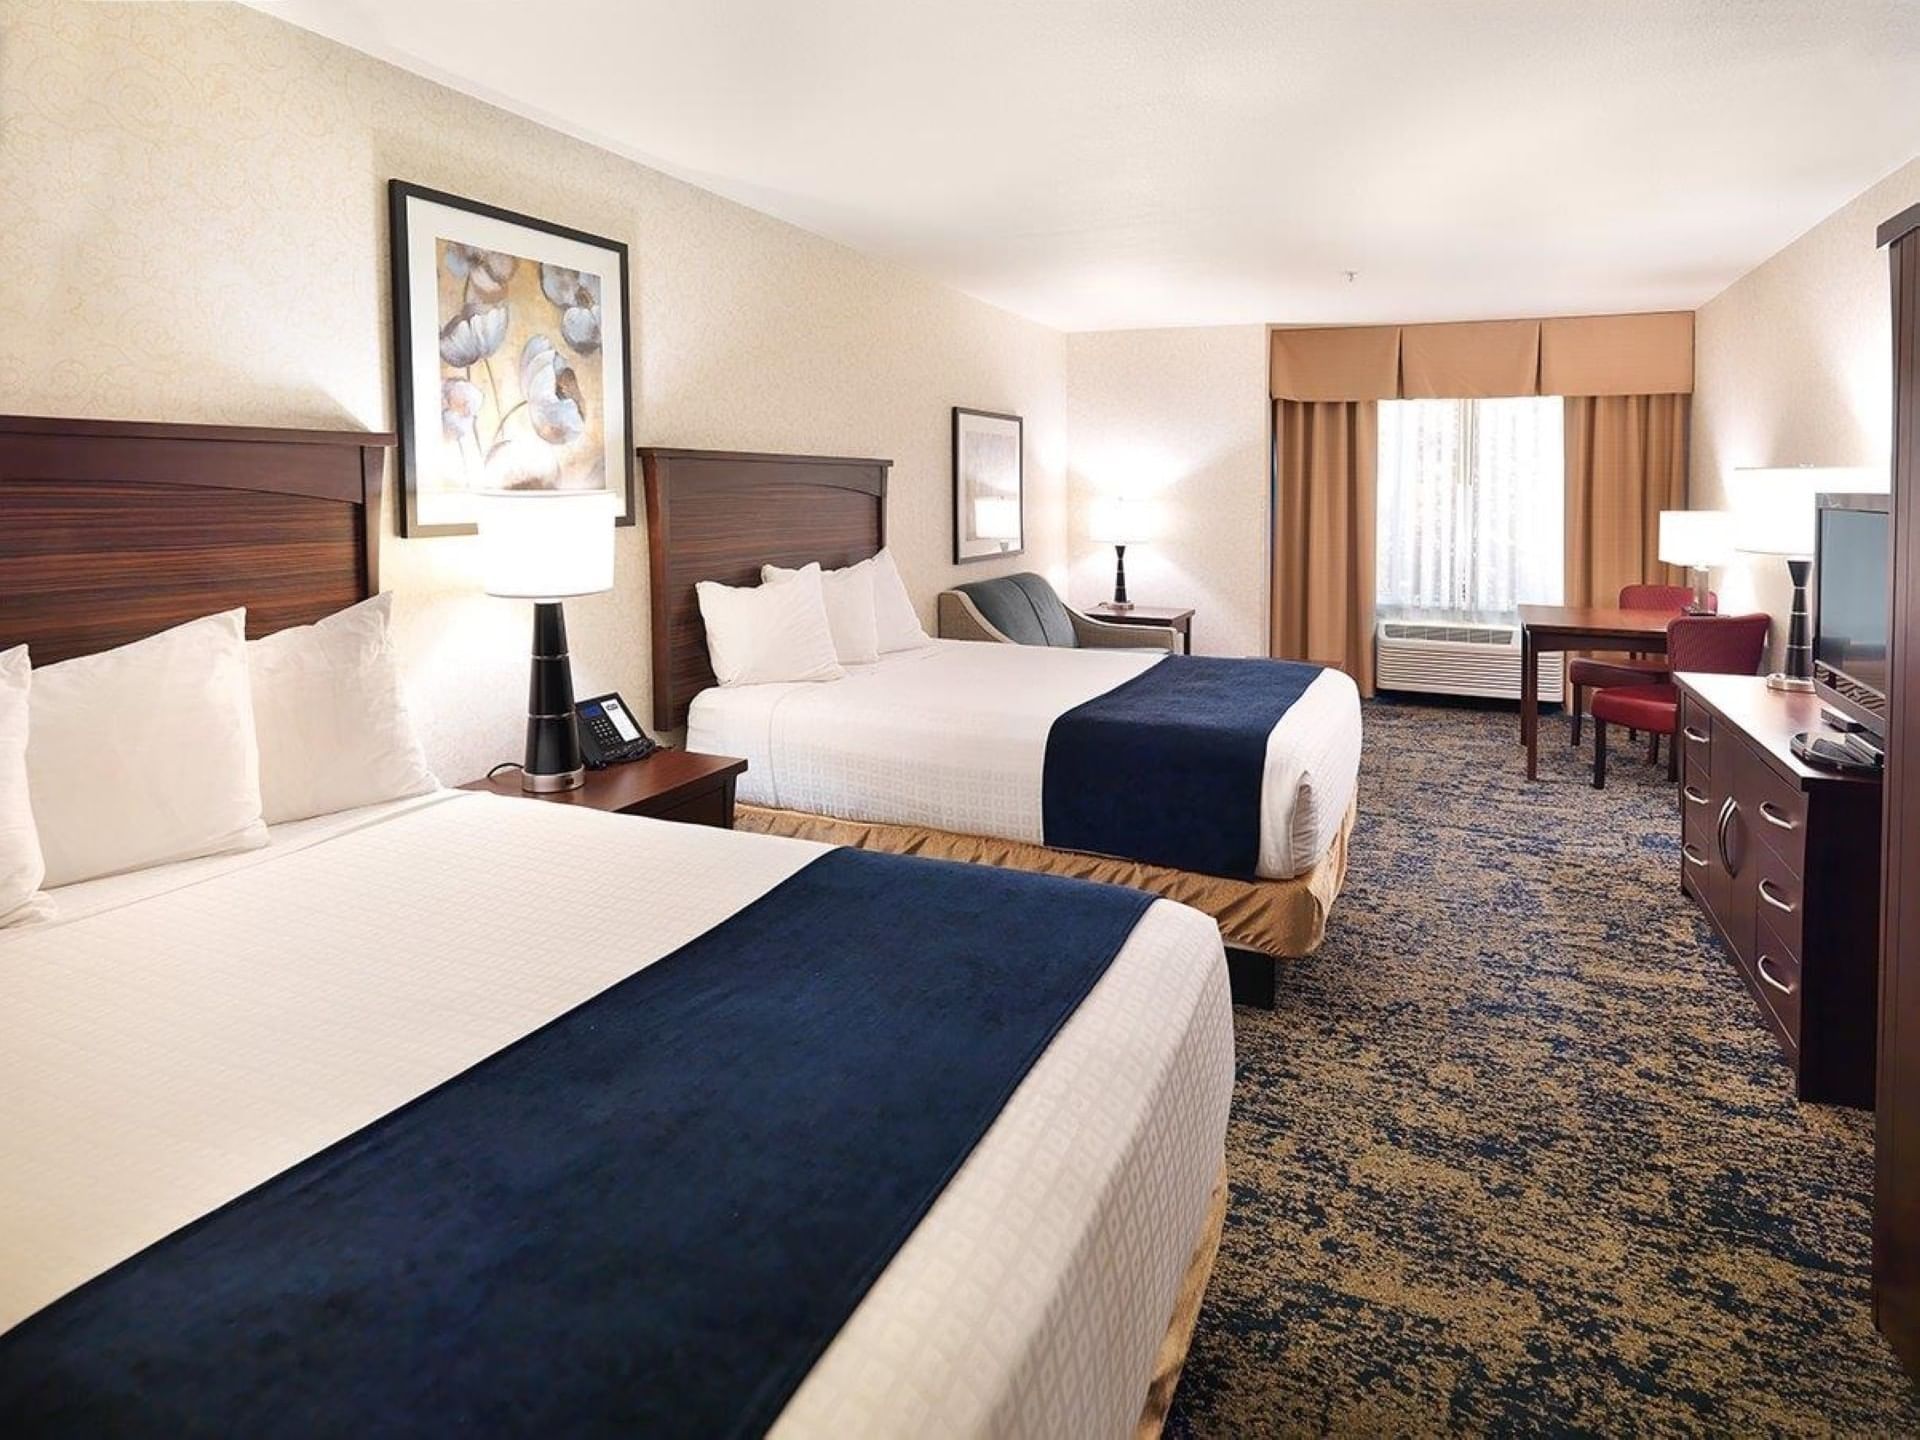 Beds and working area in Double Queen Room with carpeted floors at Crystal Inn Salt Lake City